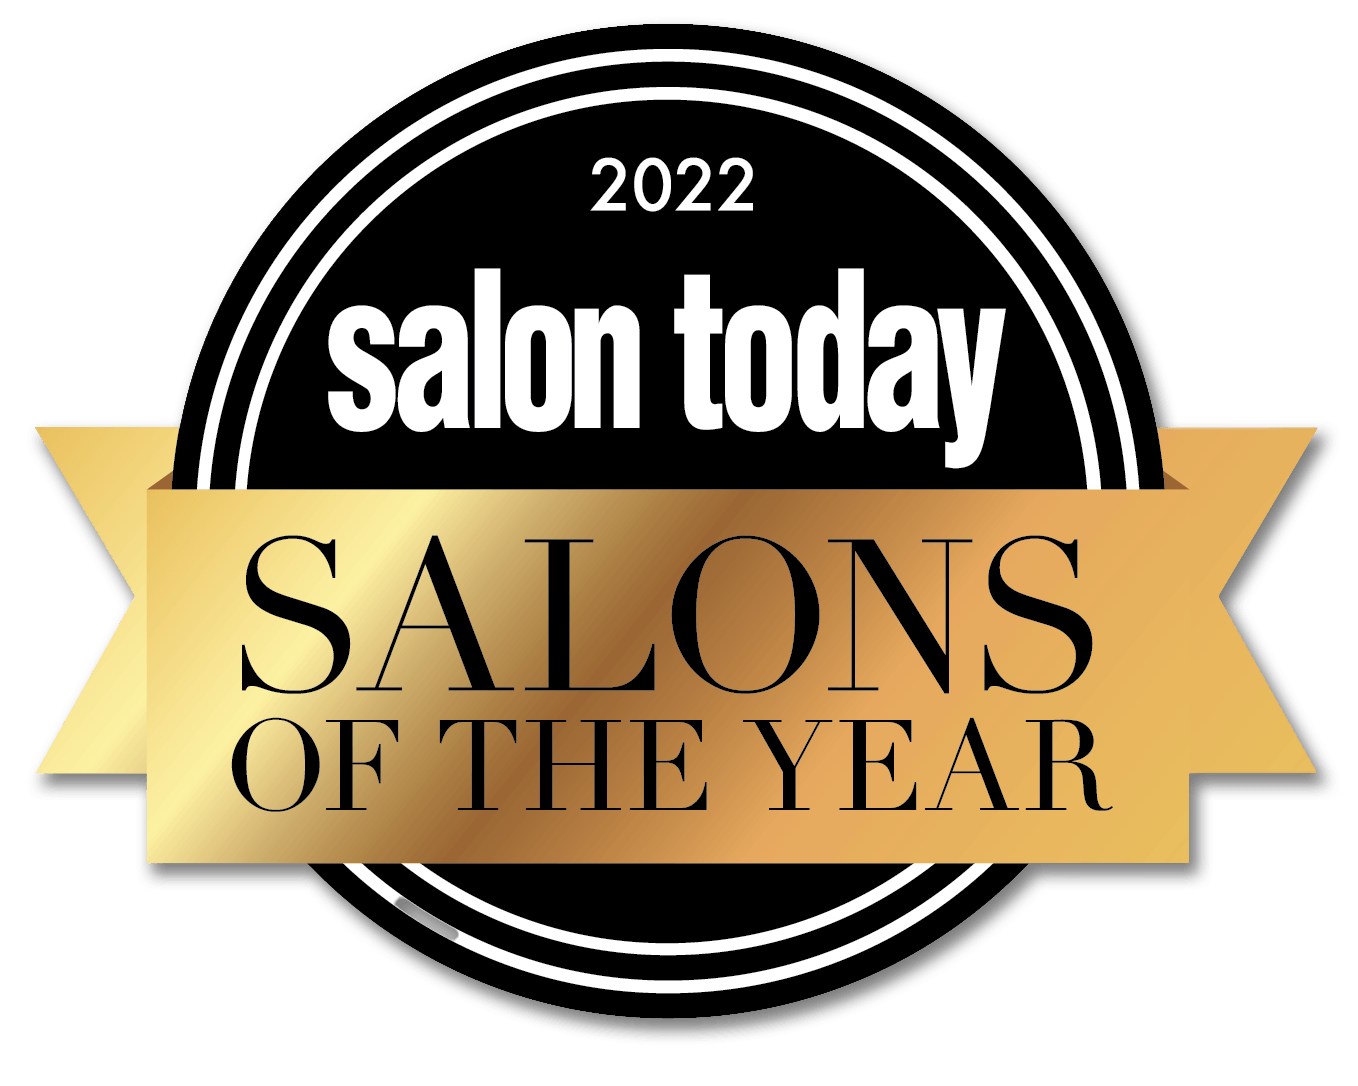 a logo for salon today salons of the year. Ottalaus salon winner